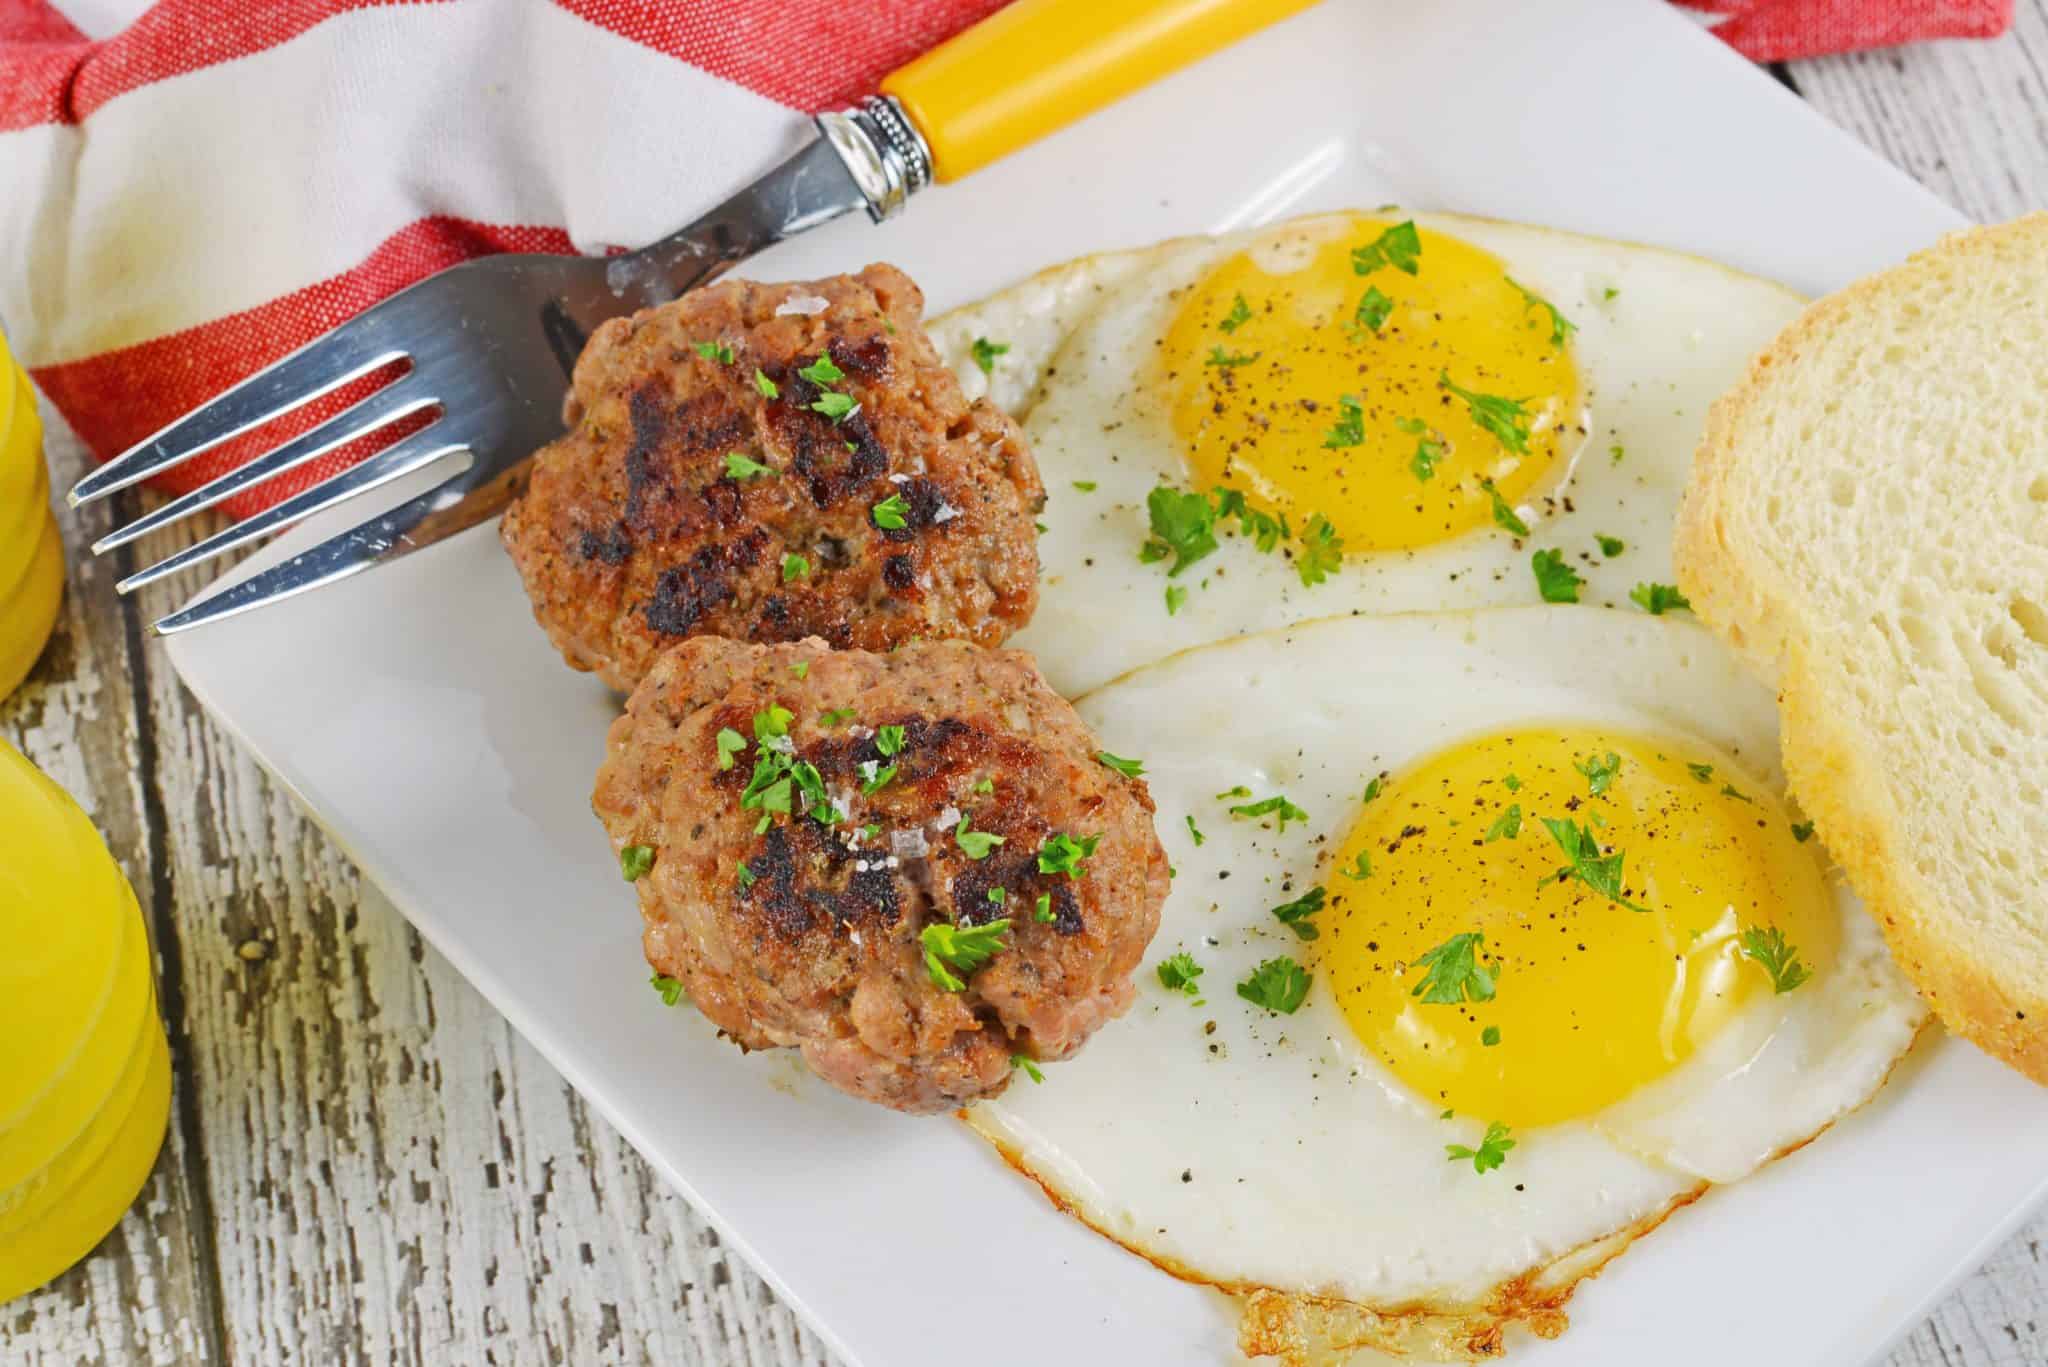 Homemade Breakfast Sausage is super easy using my proprietary blend of breakfast sausage seasoning. Add eggs and toast to complete your delicious breakfast. #breakfastsausagerecipe #breakfastsausageseasoning #homemadebreakfastsausage www.savoryexperiments.com